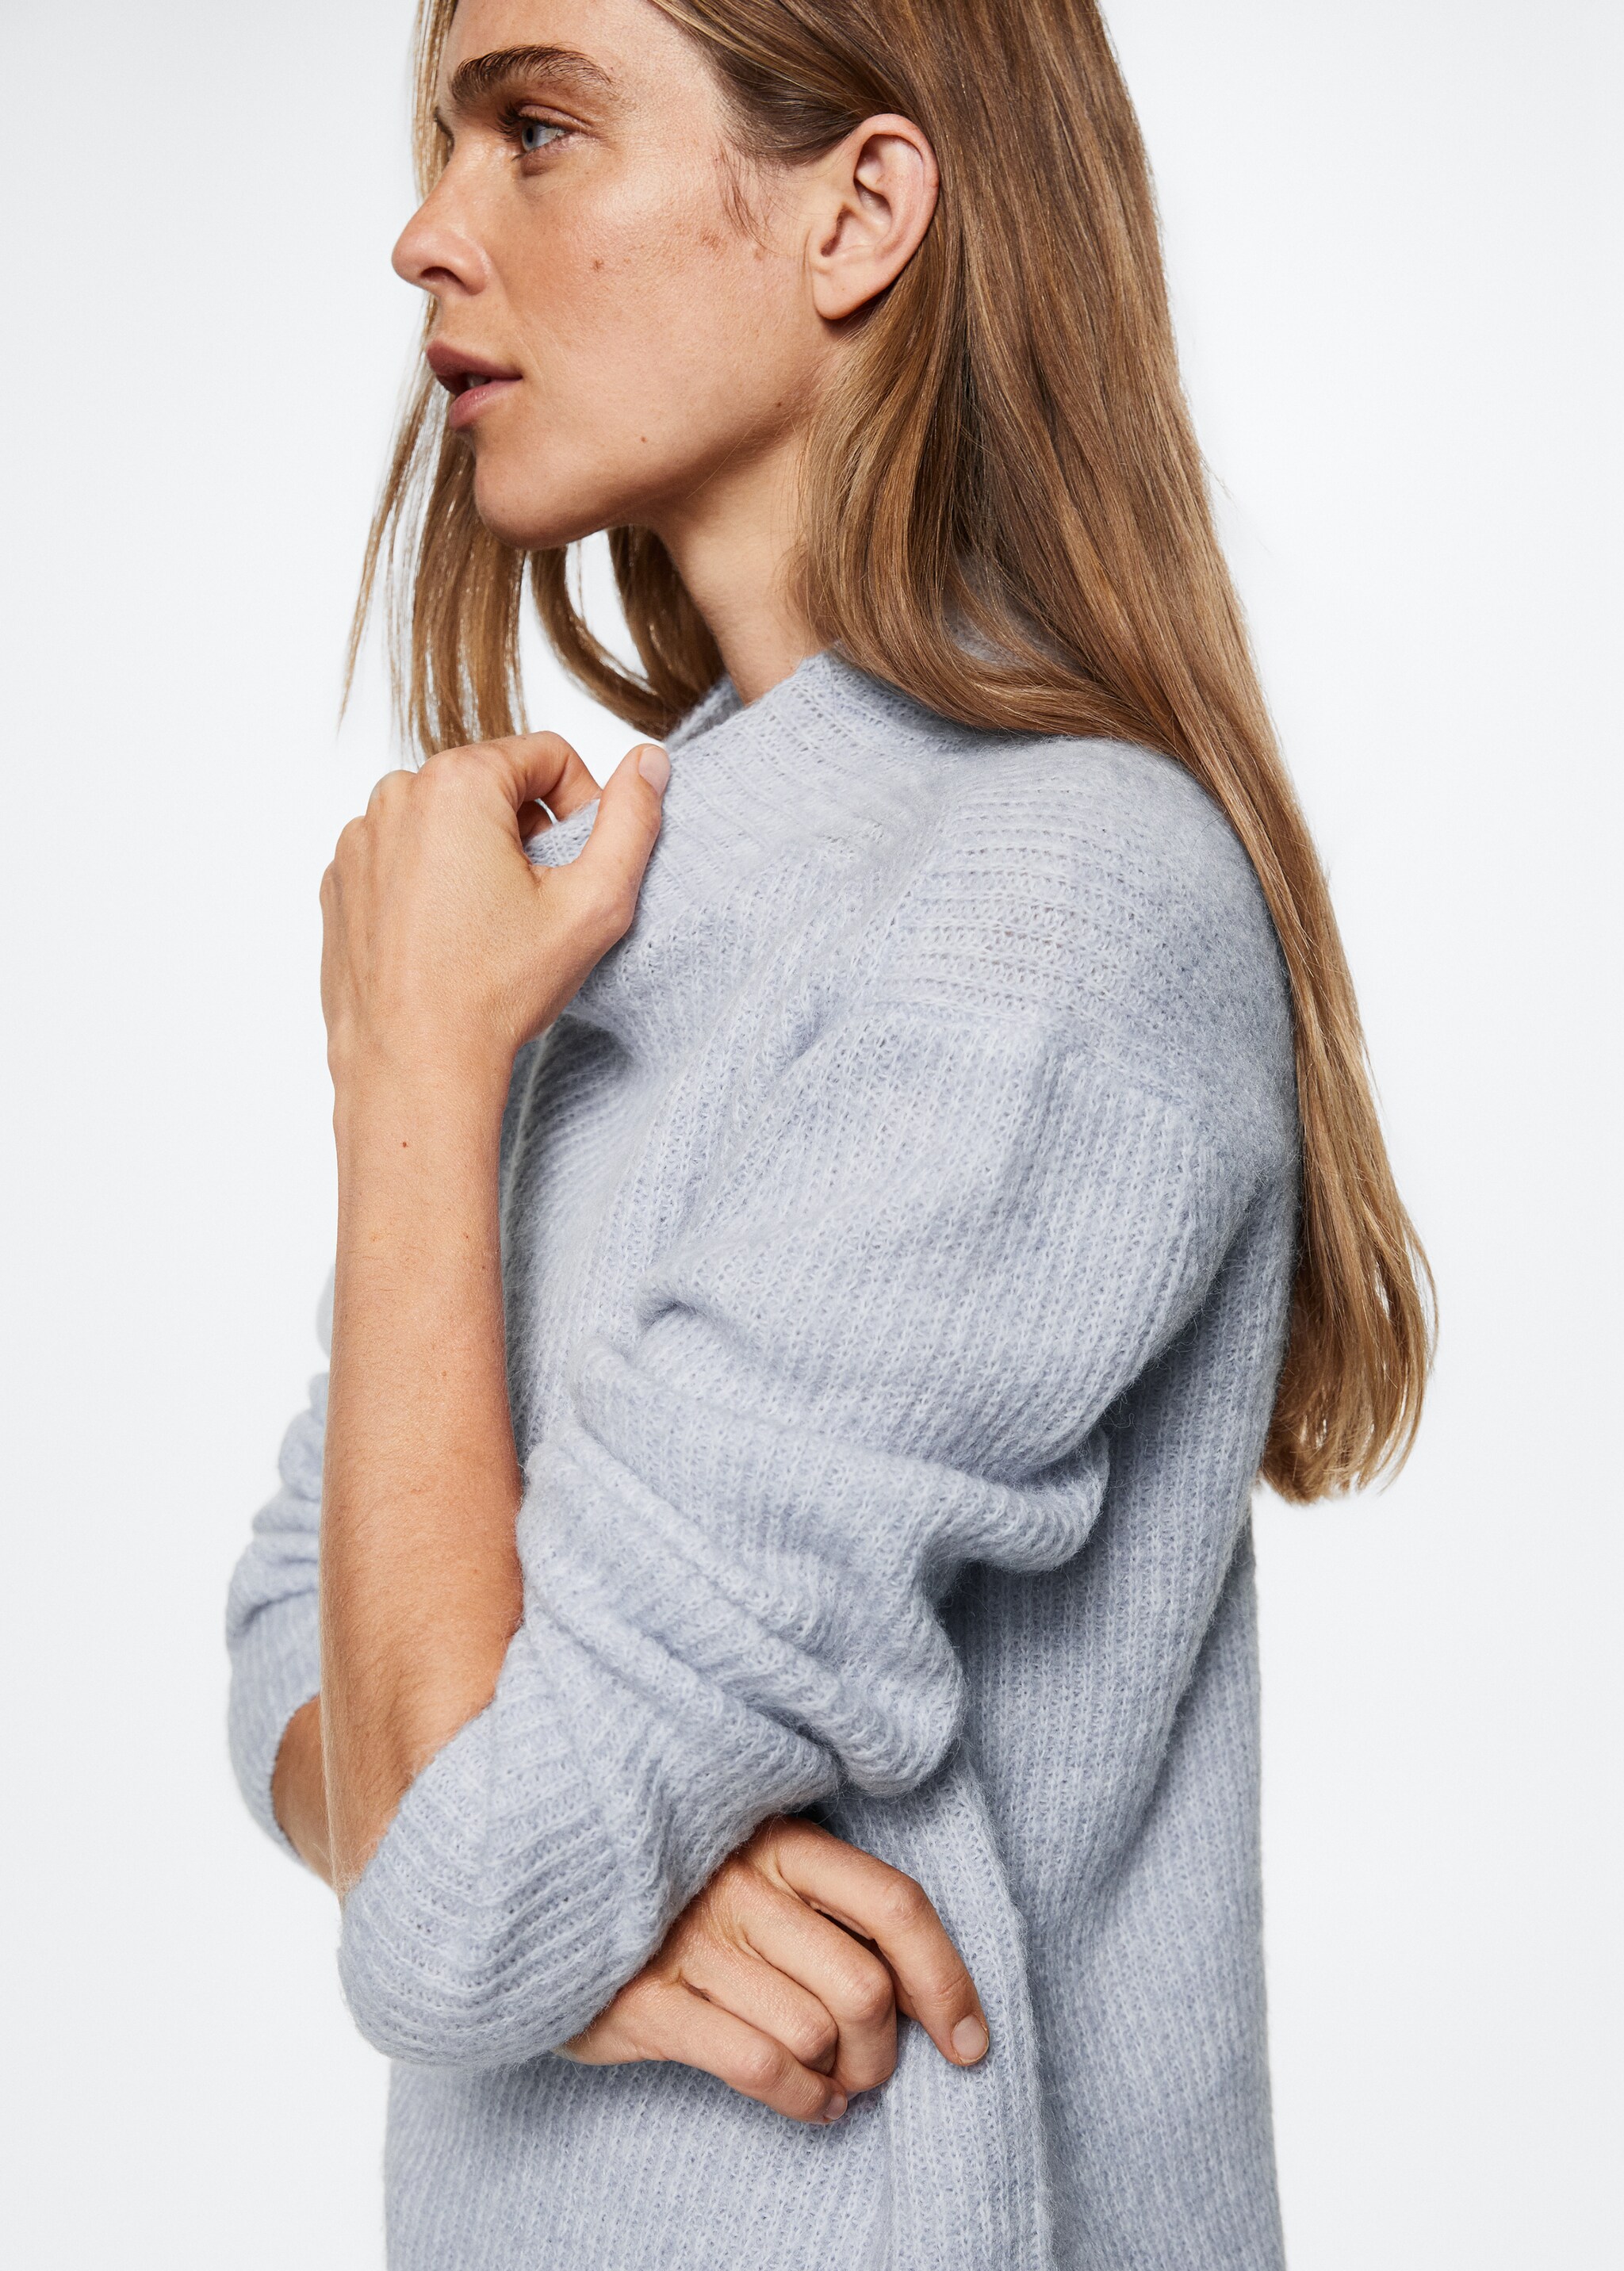 High collar sweater - Details of the article 4